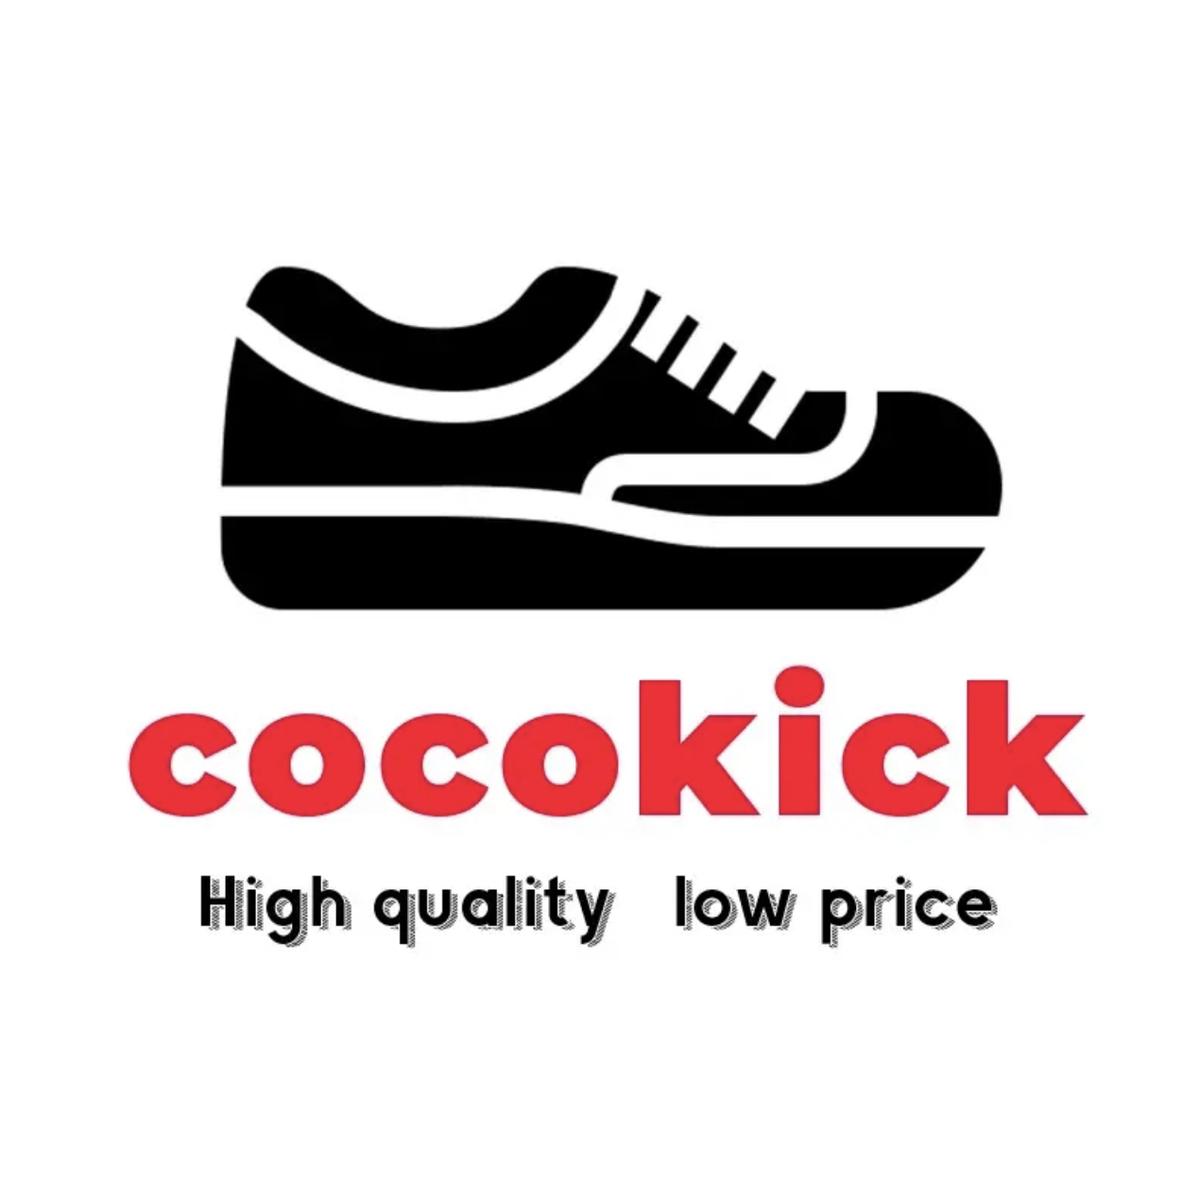 cocokick's images